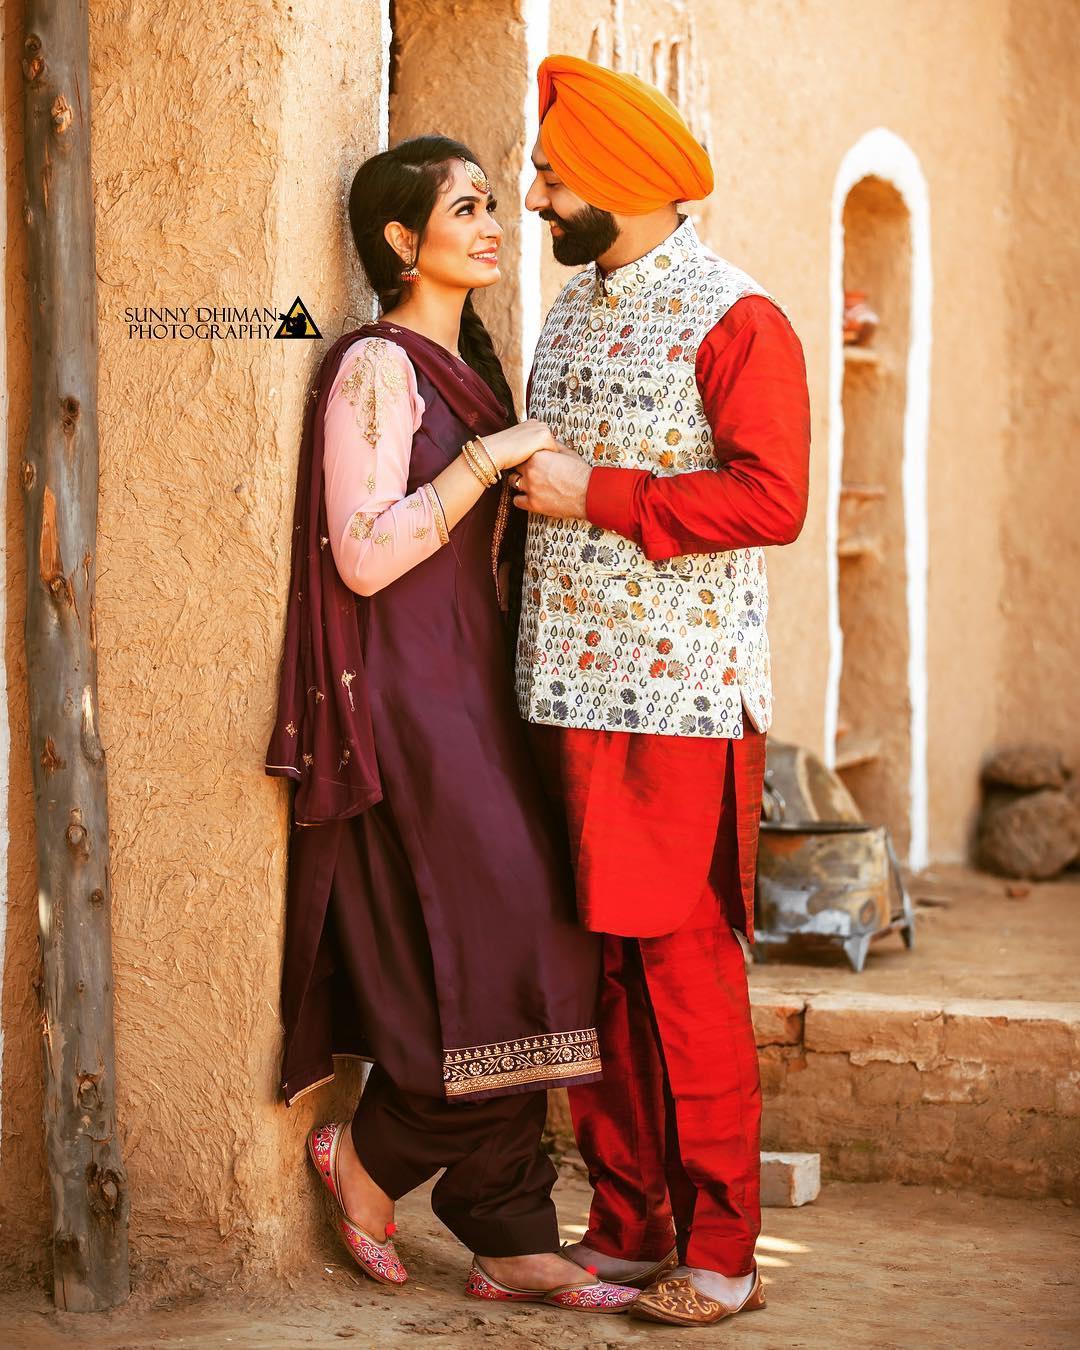 Salwar kameez - the traditional attire's journey over the ages